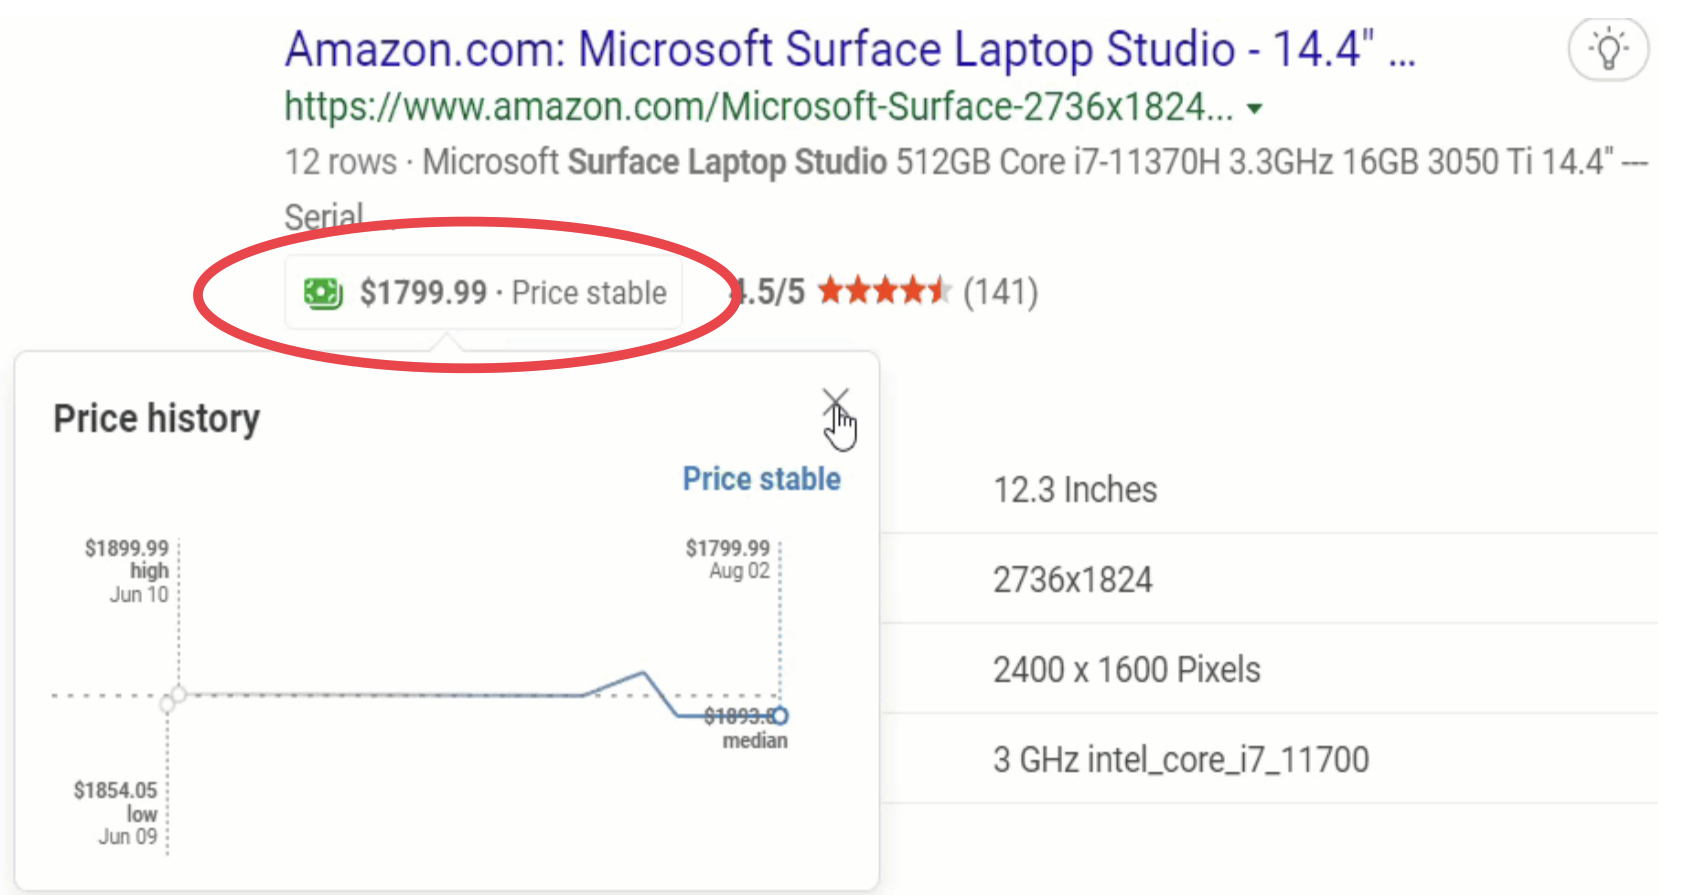 Microsoft Bing Adds Coupon Codes to Shopping Search